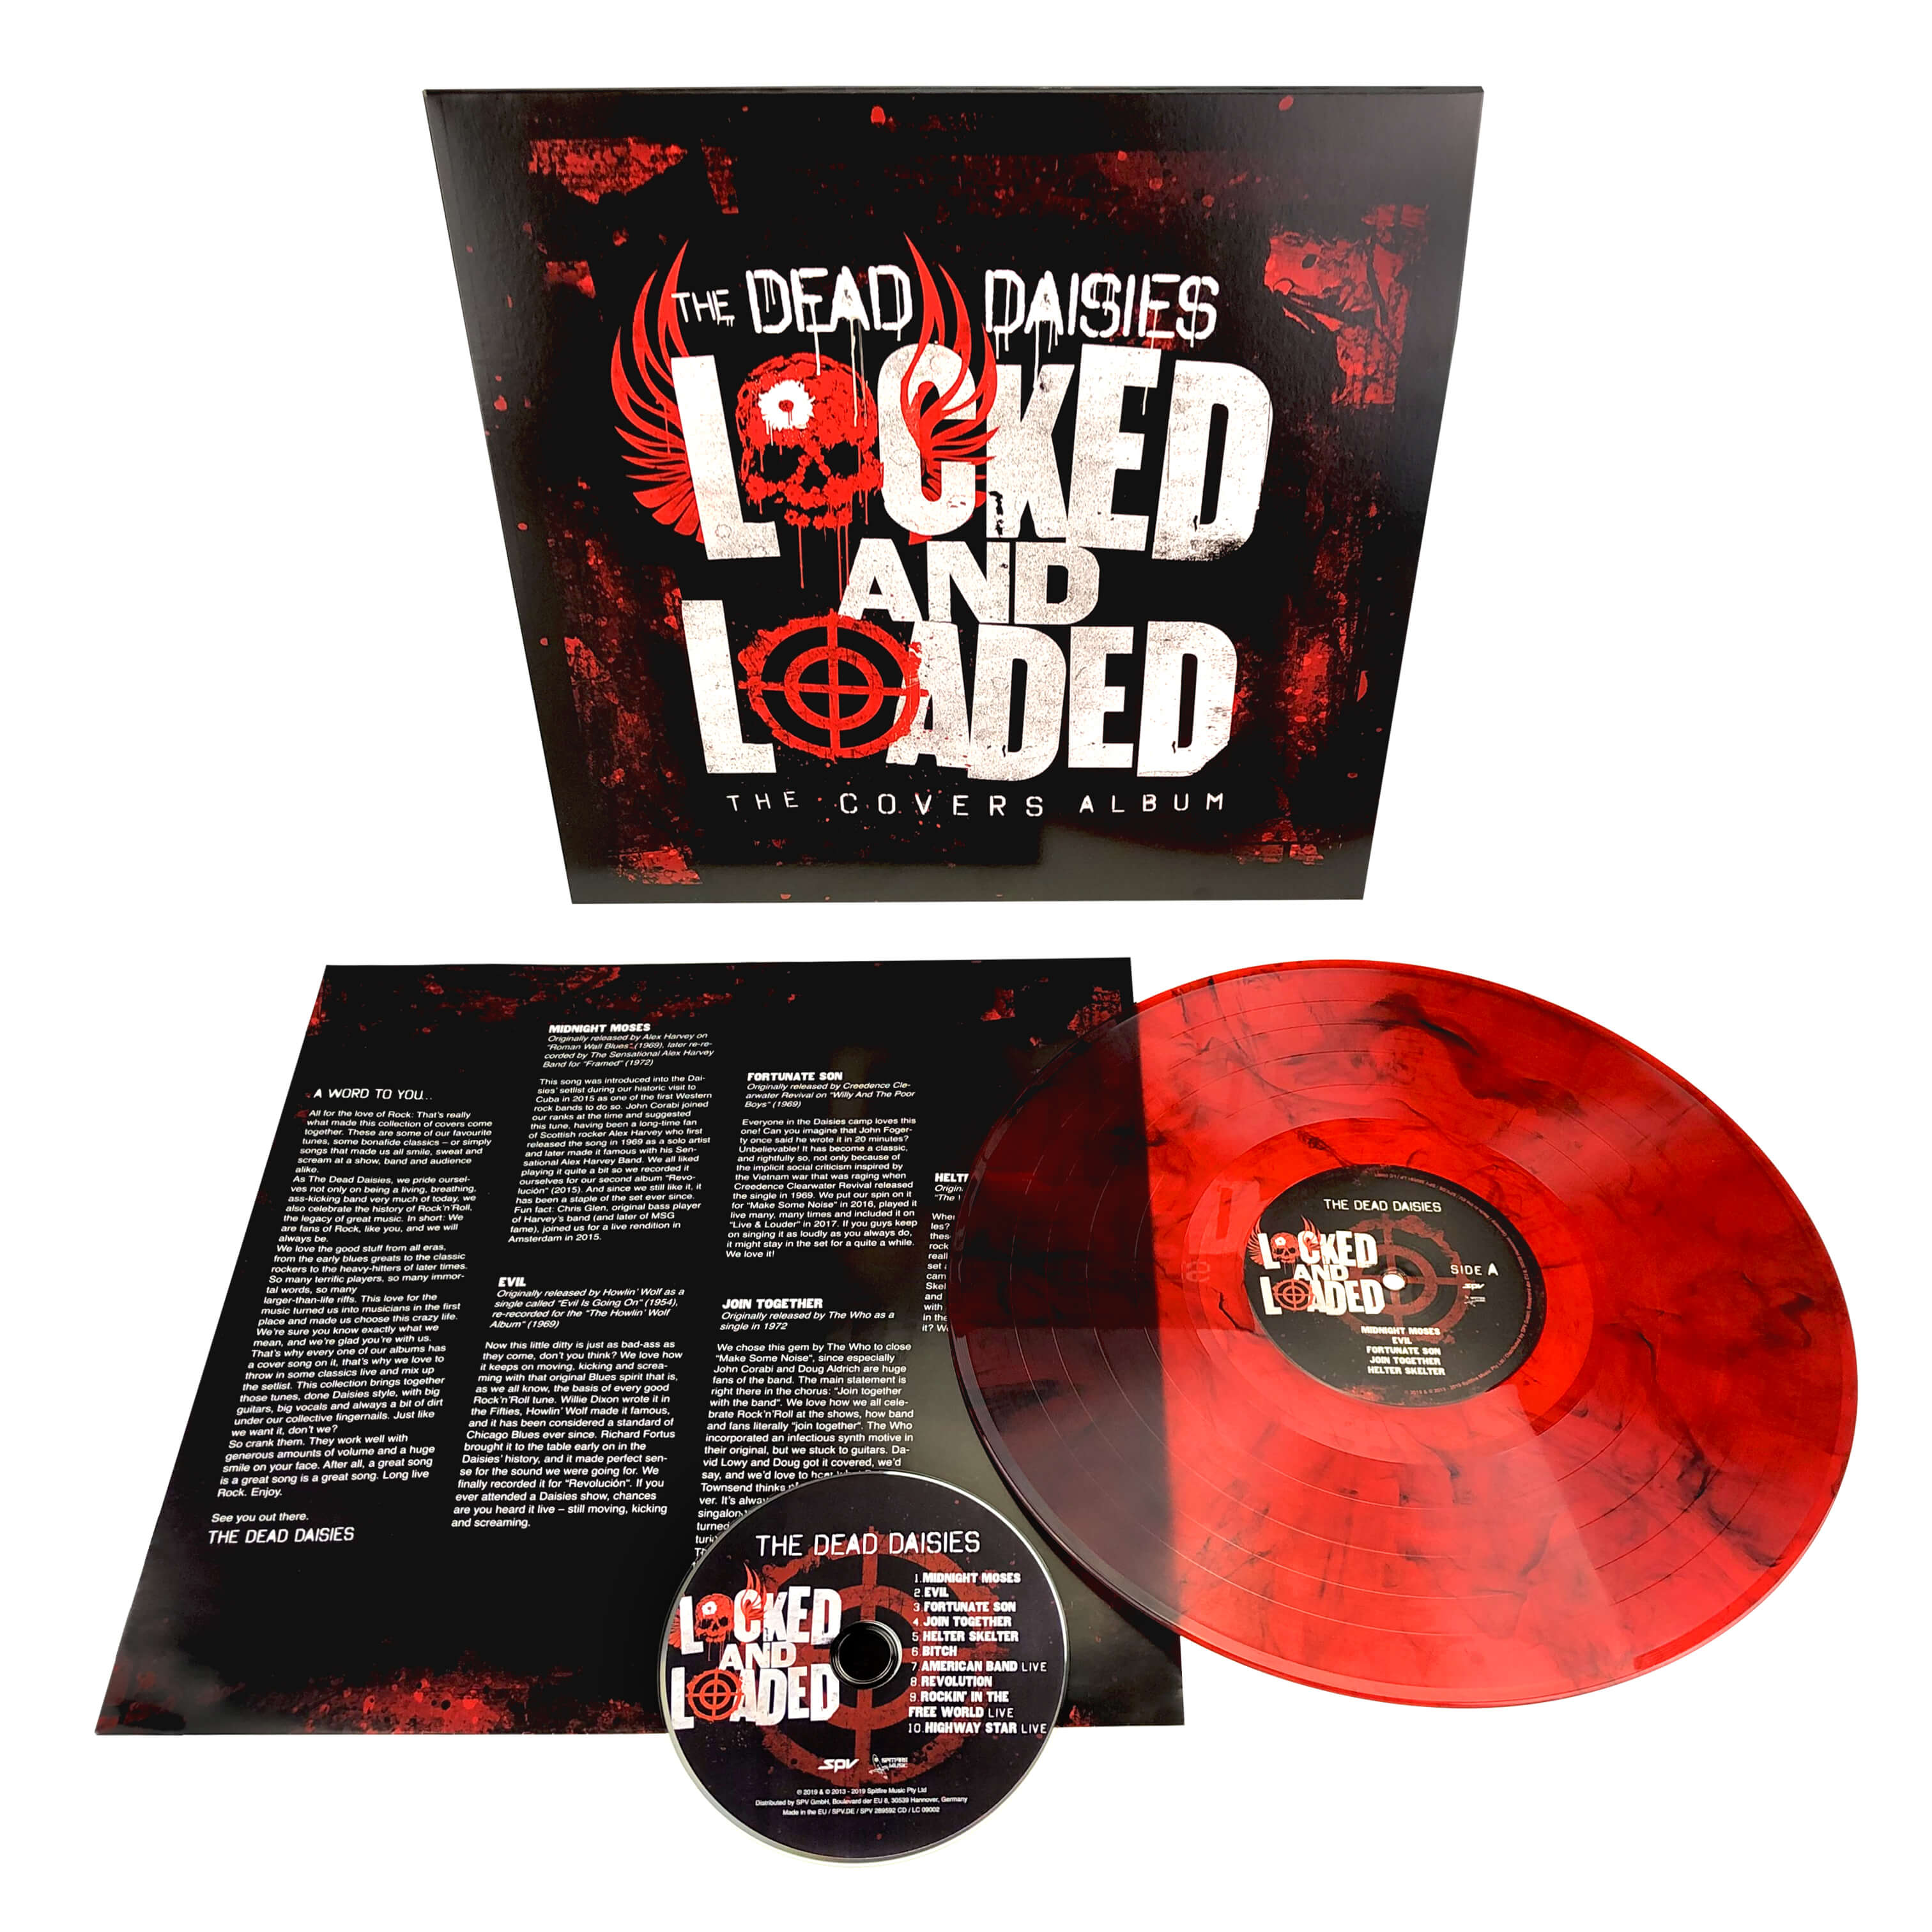 Thedeaddaisies_lockedandloaded_lp_web